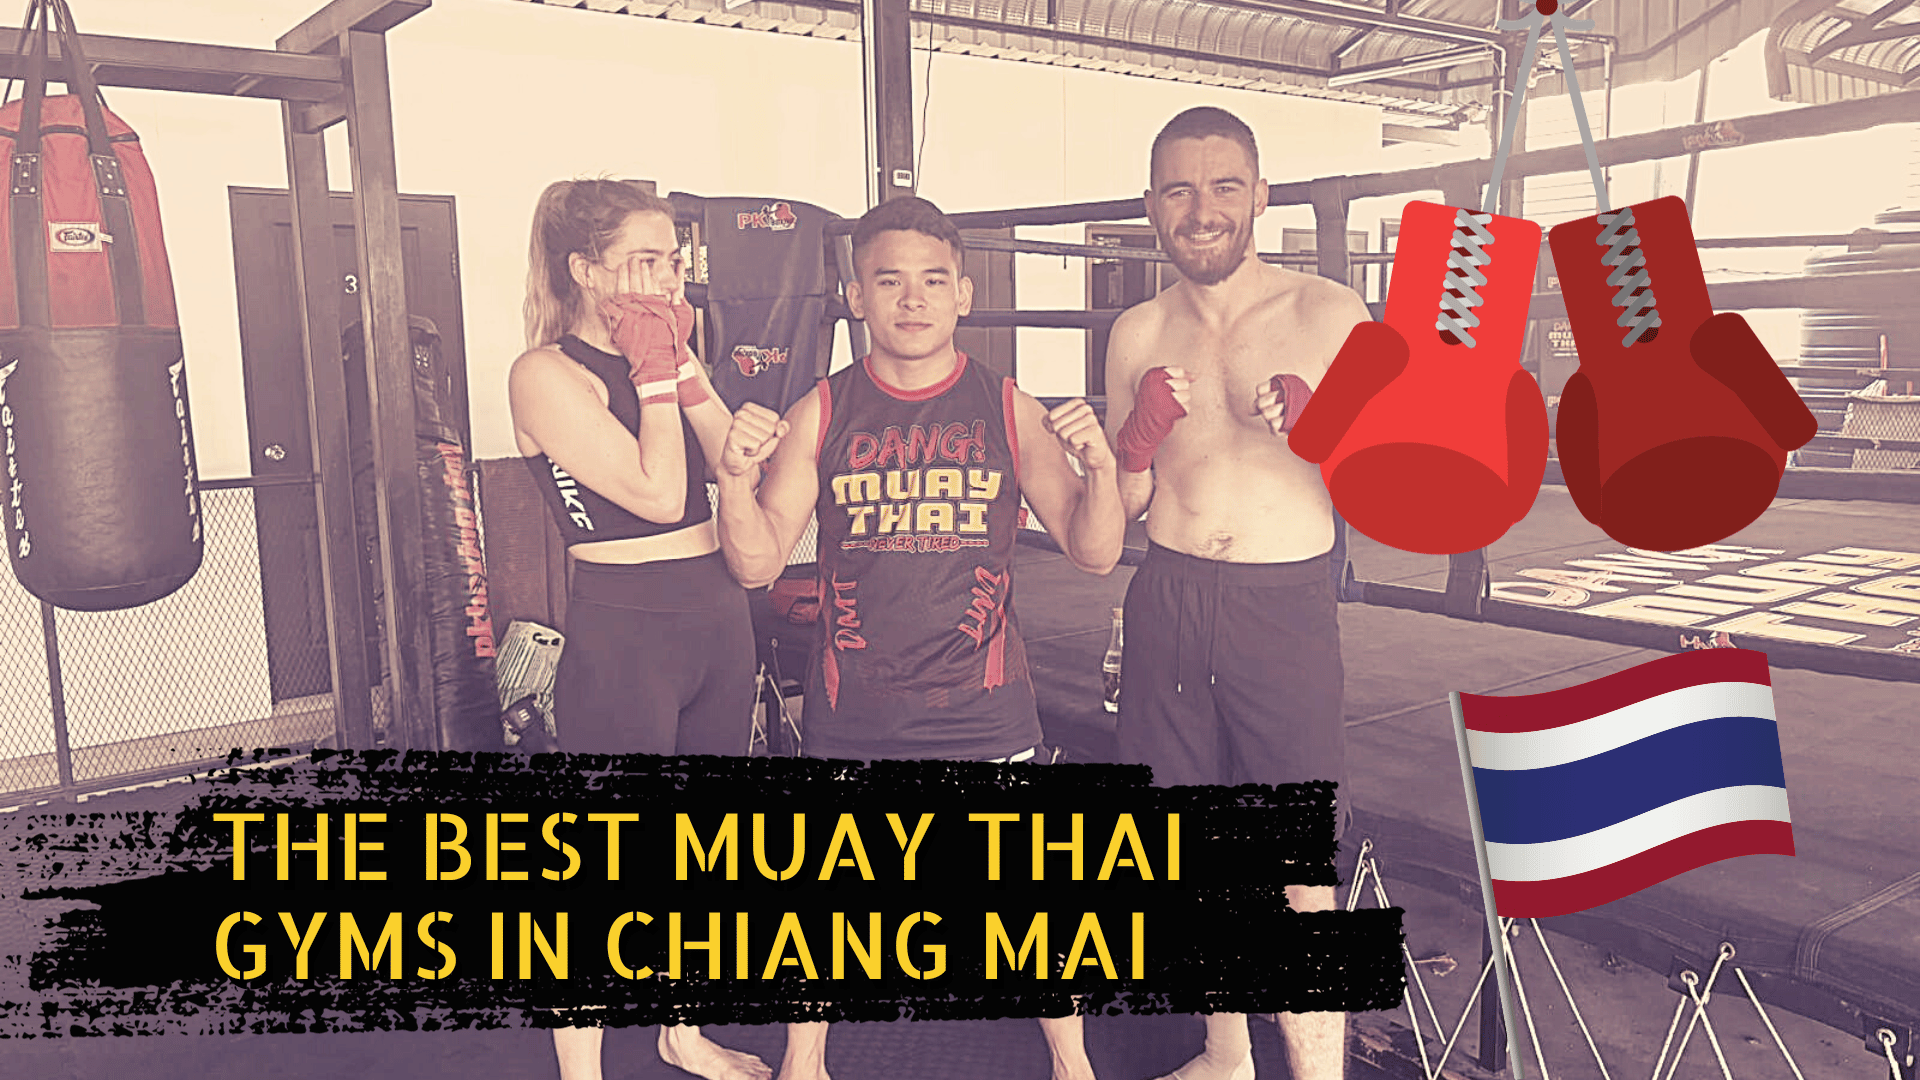 A Muay Thai boxing gym in Chiang Mai